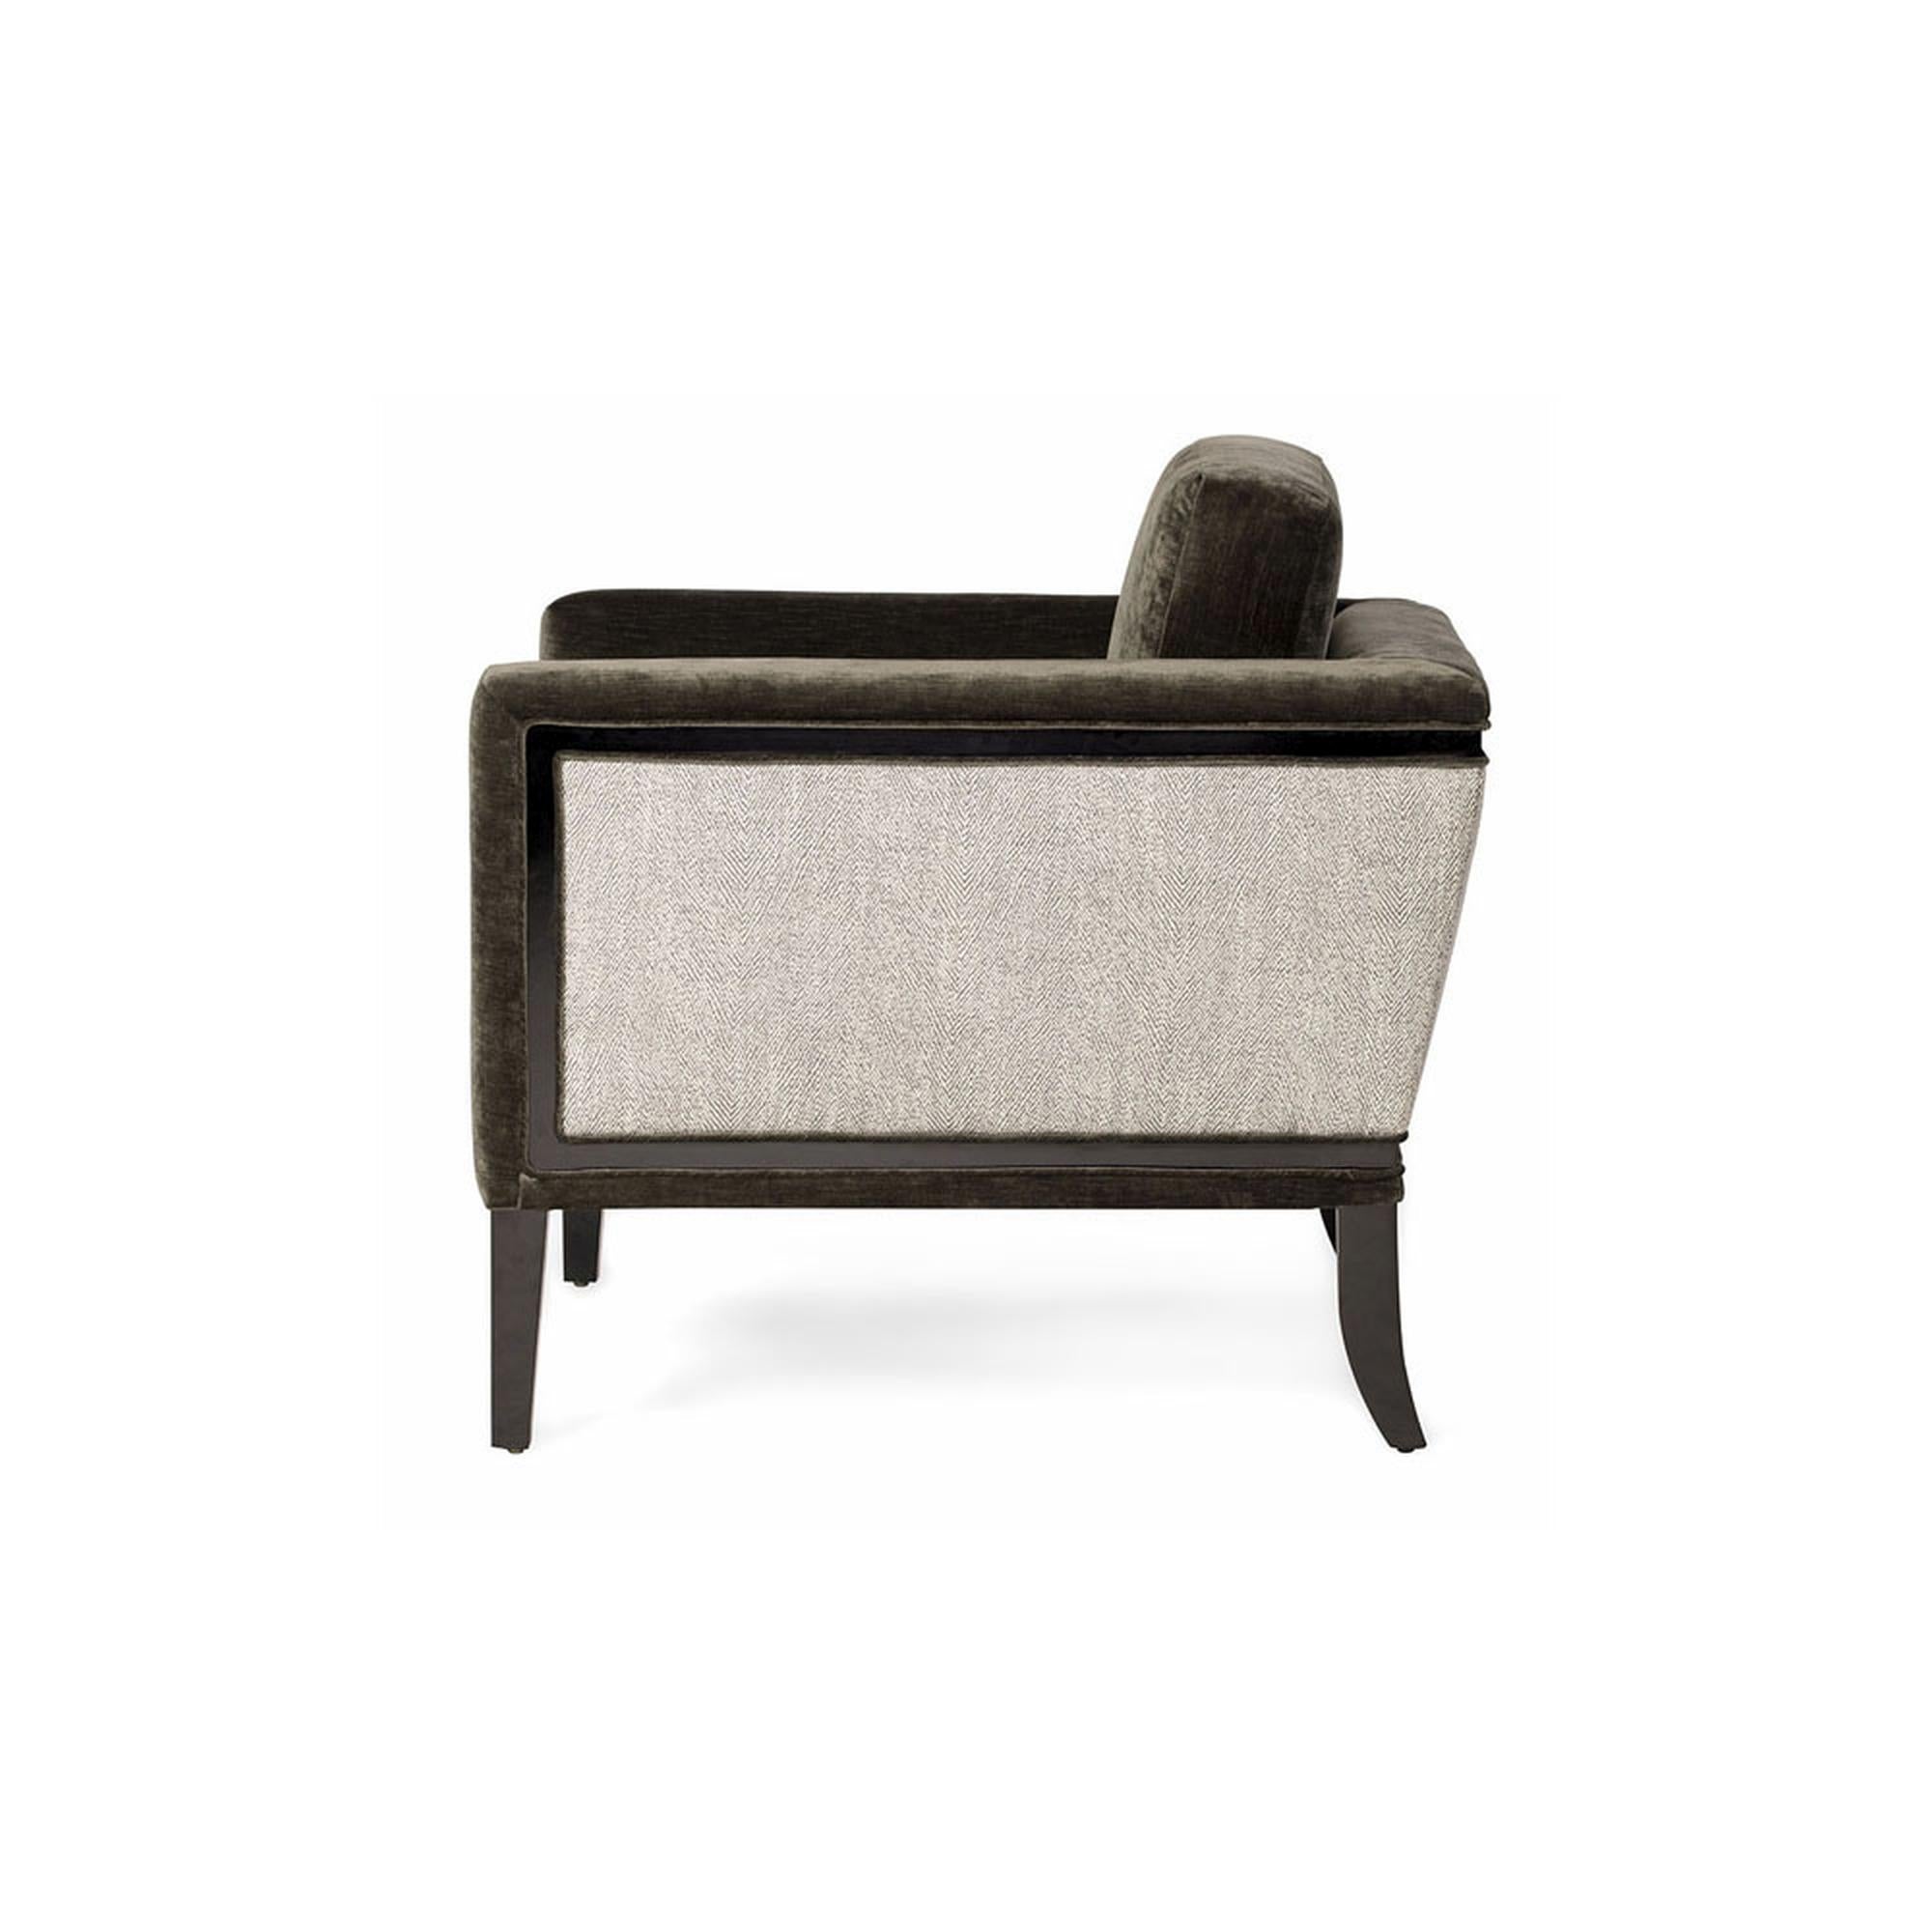 The Doheny lounge chair I bridges the gap between smaller, upright mid-century modern designs with today’s larger scale, more comfortable and stylish seating. The sleek body sits atop a lacquered wood frame and tapered legs. This chair features a